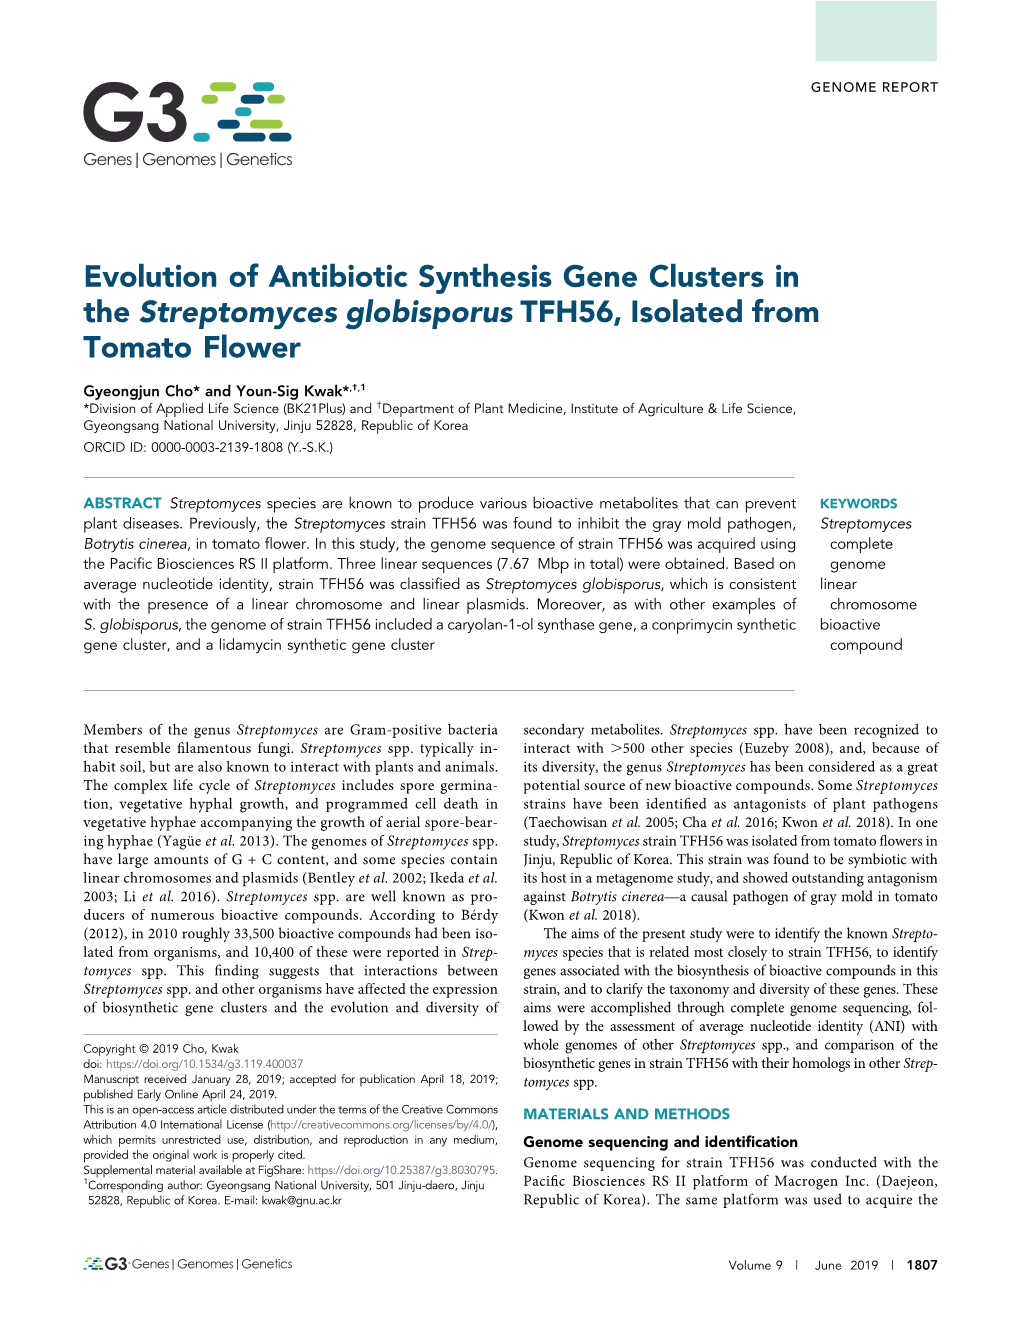 Evolution of Antibiotic Synthesis Gene Clusters in the Streptomyces Globisporus TFH56, Isolated from Tomato Flower